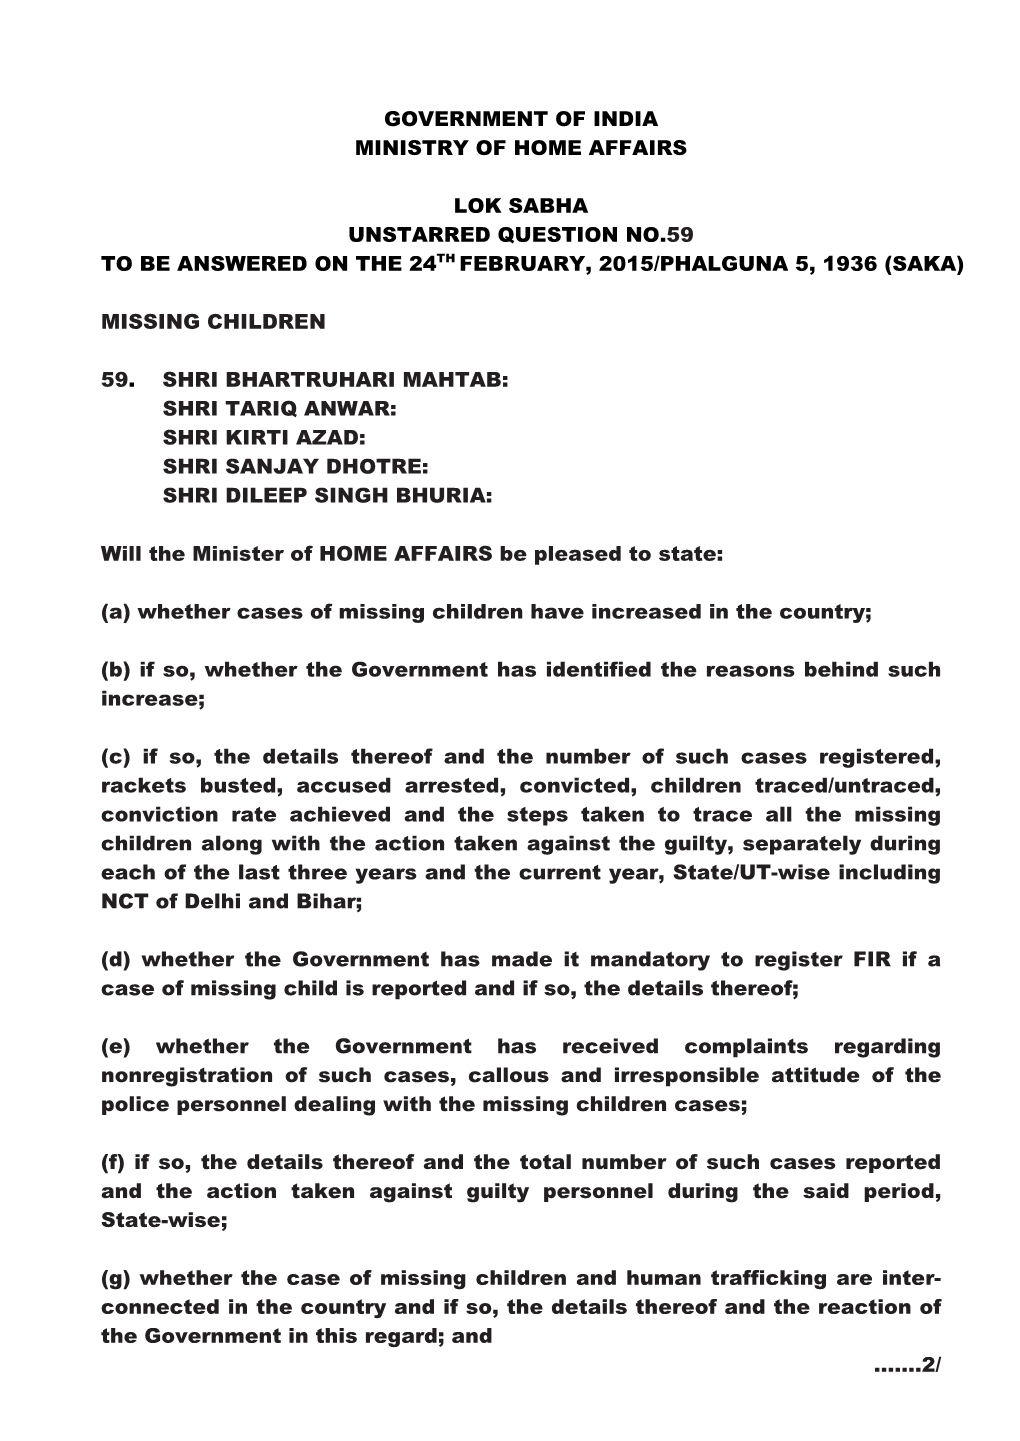 Government of India Ministry of Home Affairs Lok Sabha Unstarred Question No.59 to Be Answered on the 24Th February, 2015/Phalgu